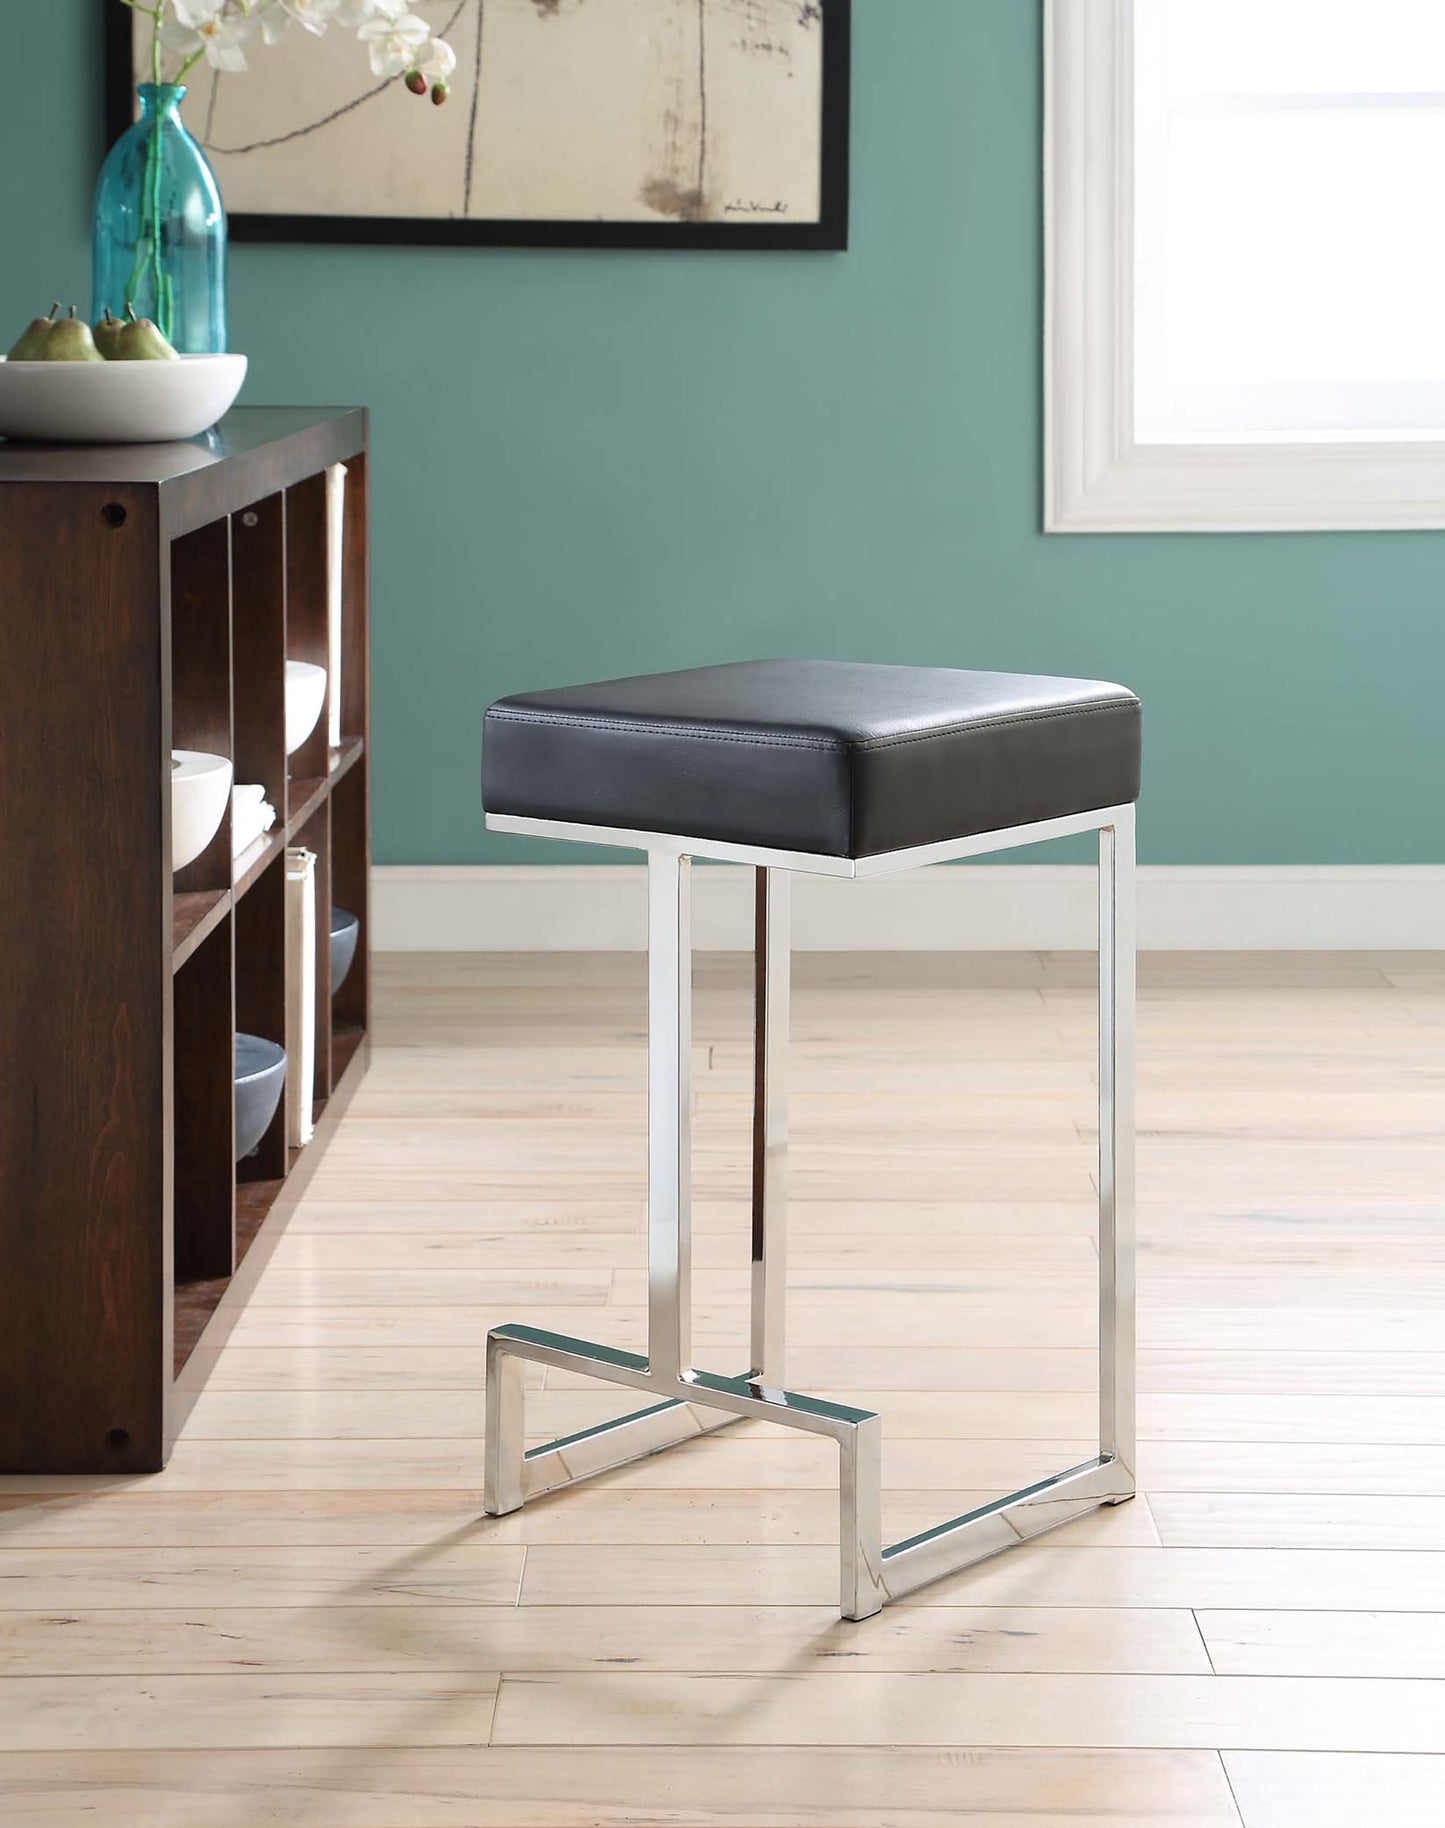 Gervase Square Counter Height Stool Black and Chrome